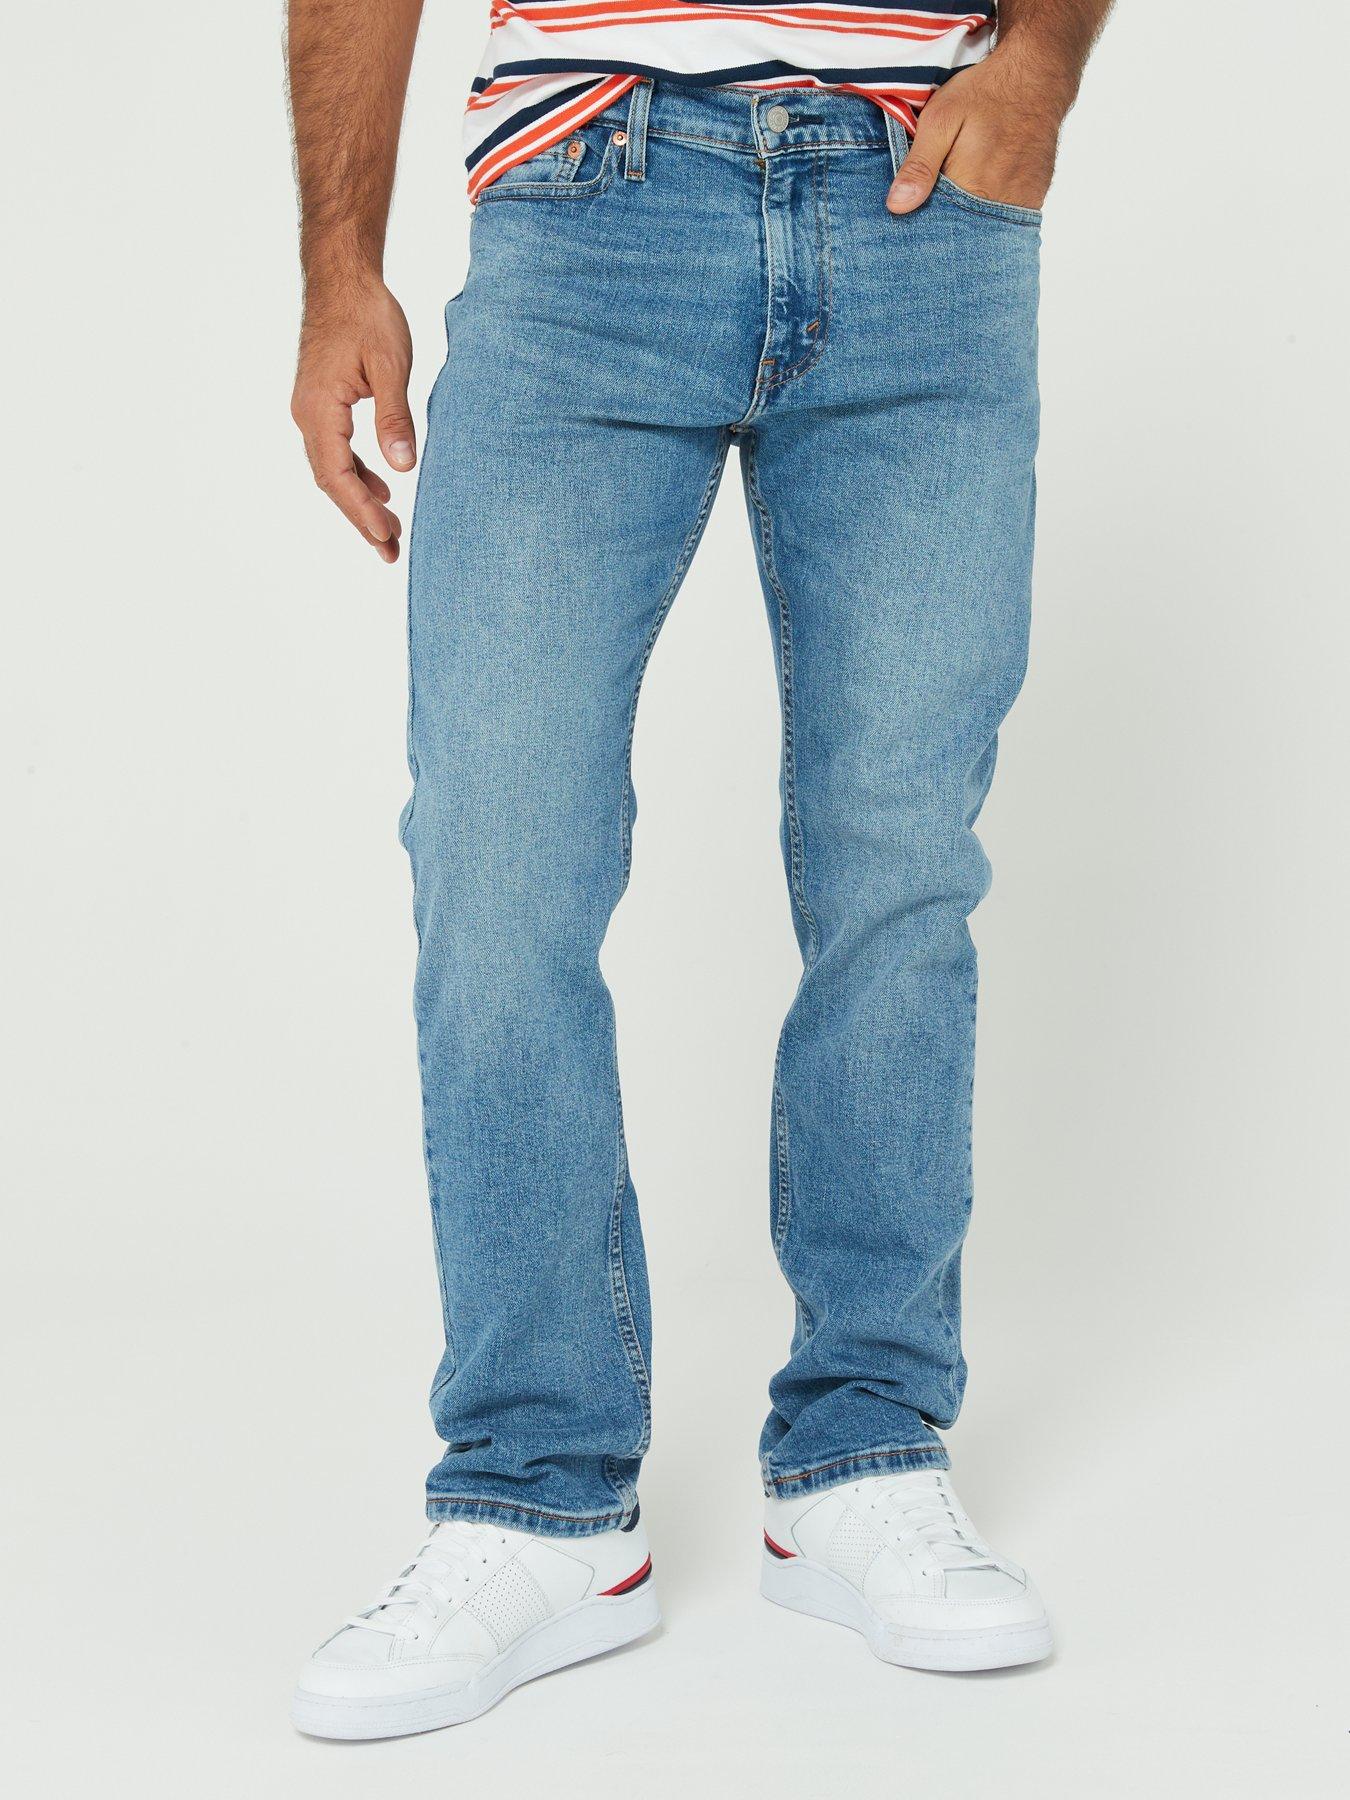 513 Slim Straight Fit Jeans - Far Out Clb Adv - Blue